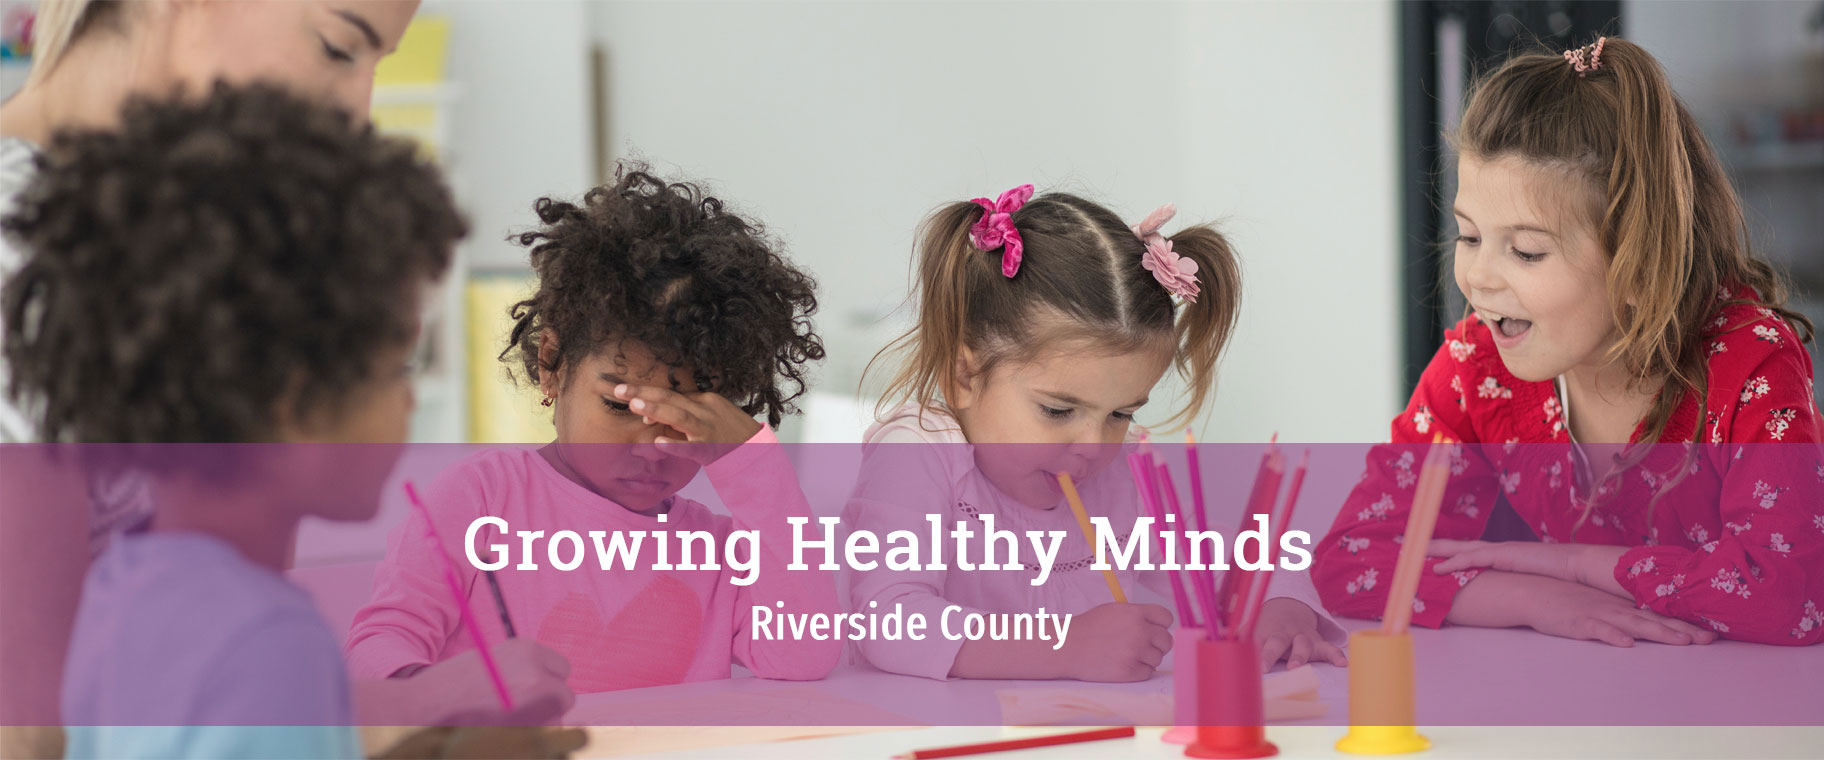 Growing Healthy Minds Banner